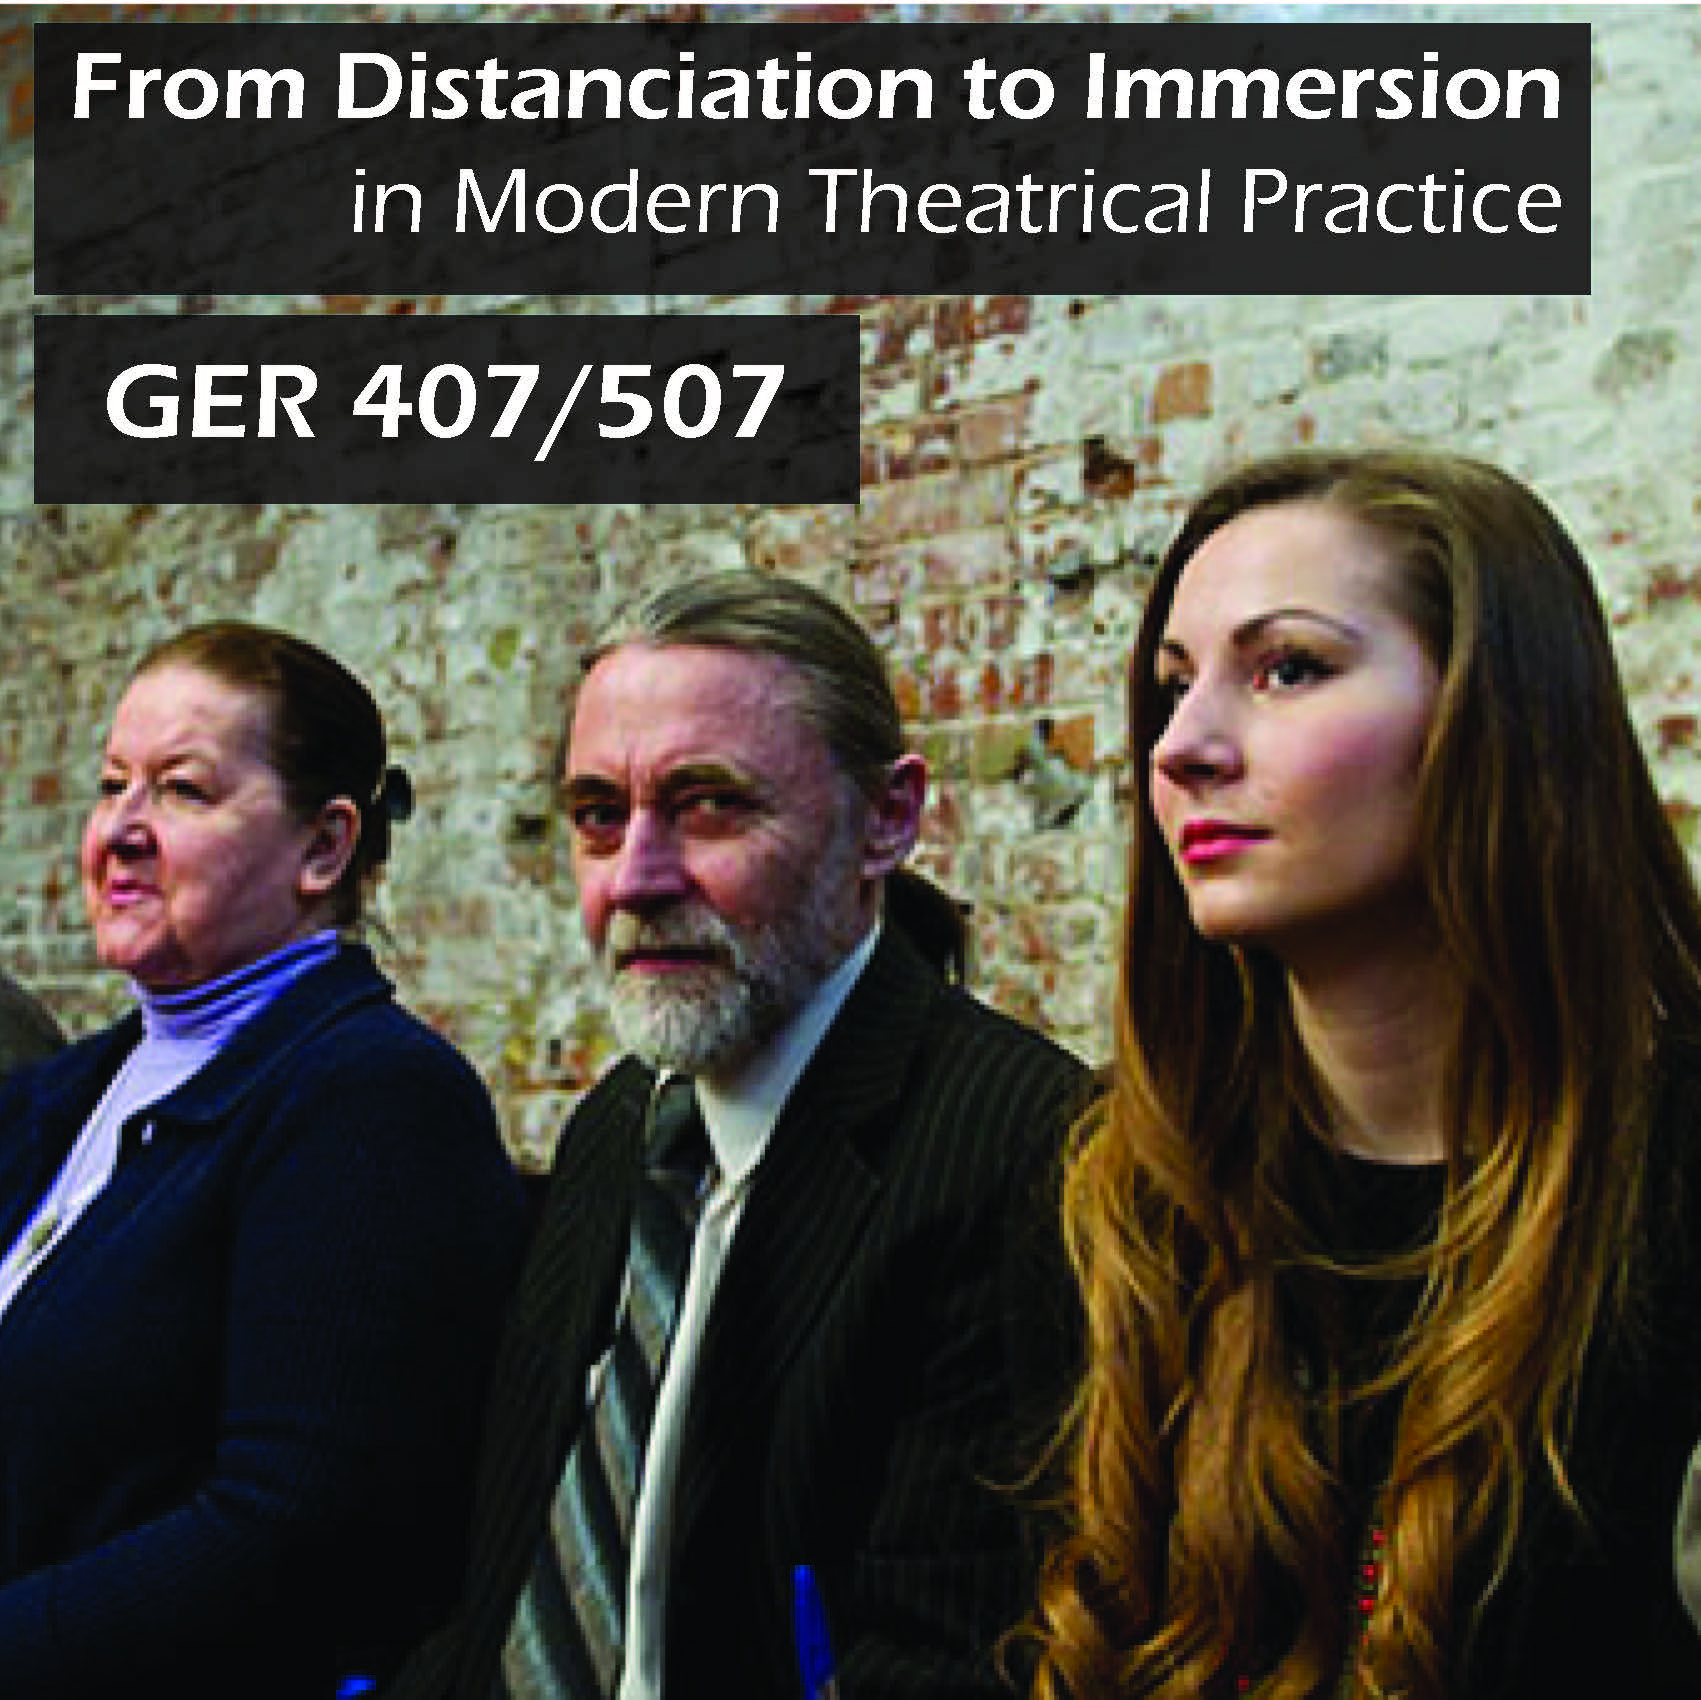 GER 407/507 Seminar: Distanciation to Immersion in Modern Theatrical Practice